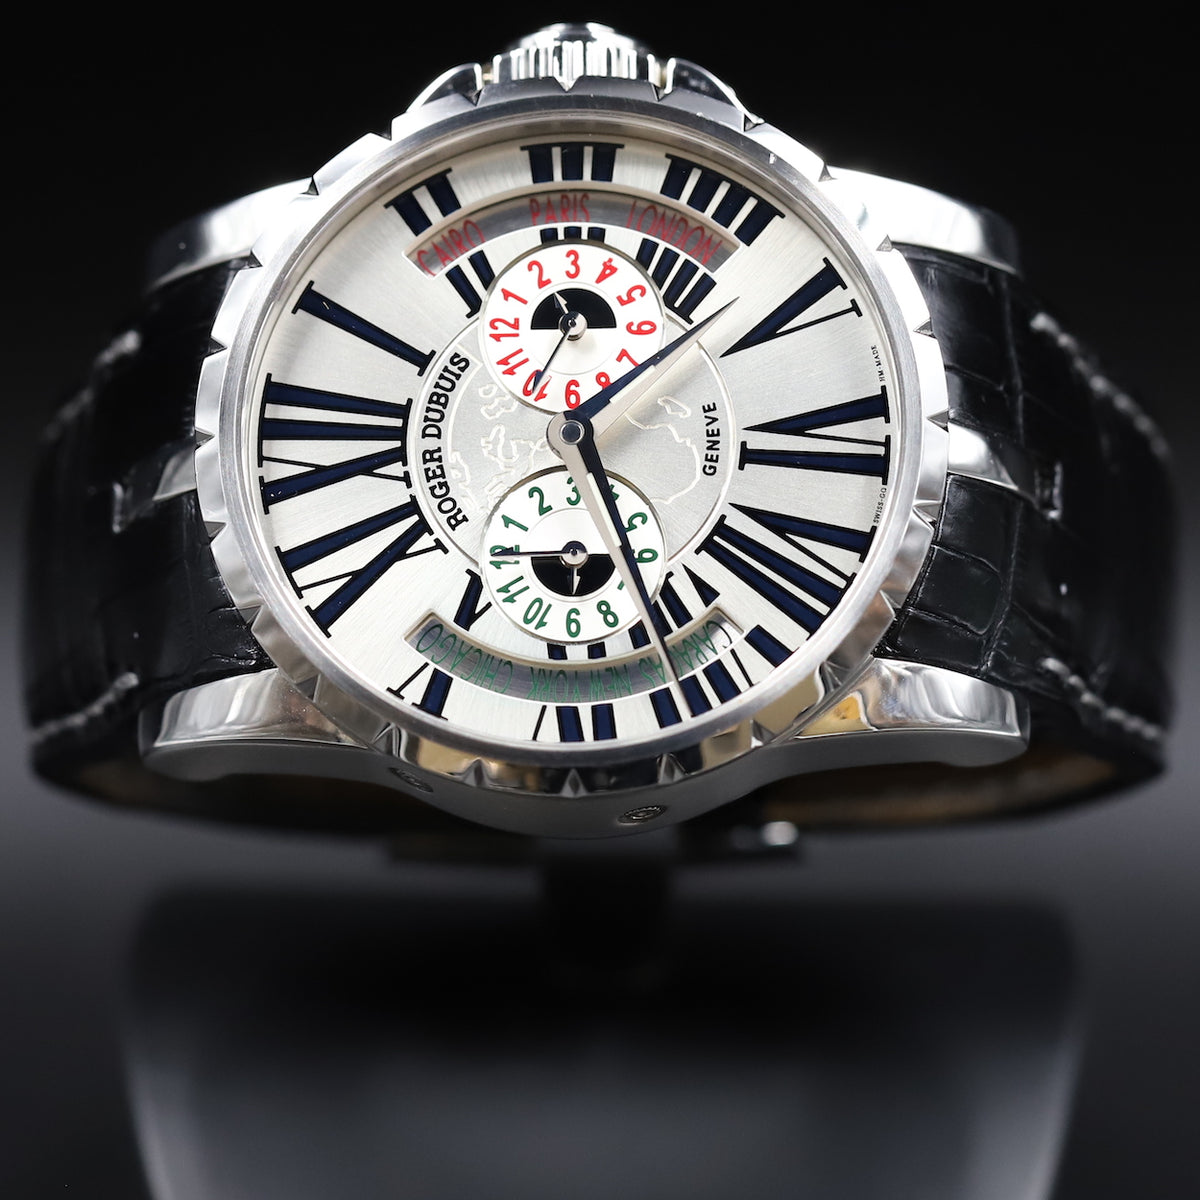 Roger Dubuis<br>EX45 1448 0 3.7ATT/28 Excalibur World Time Zone